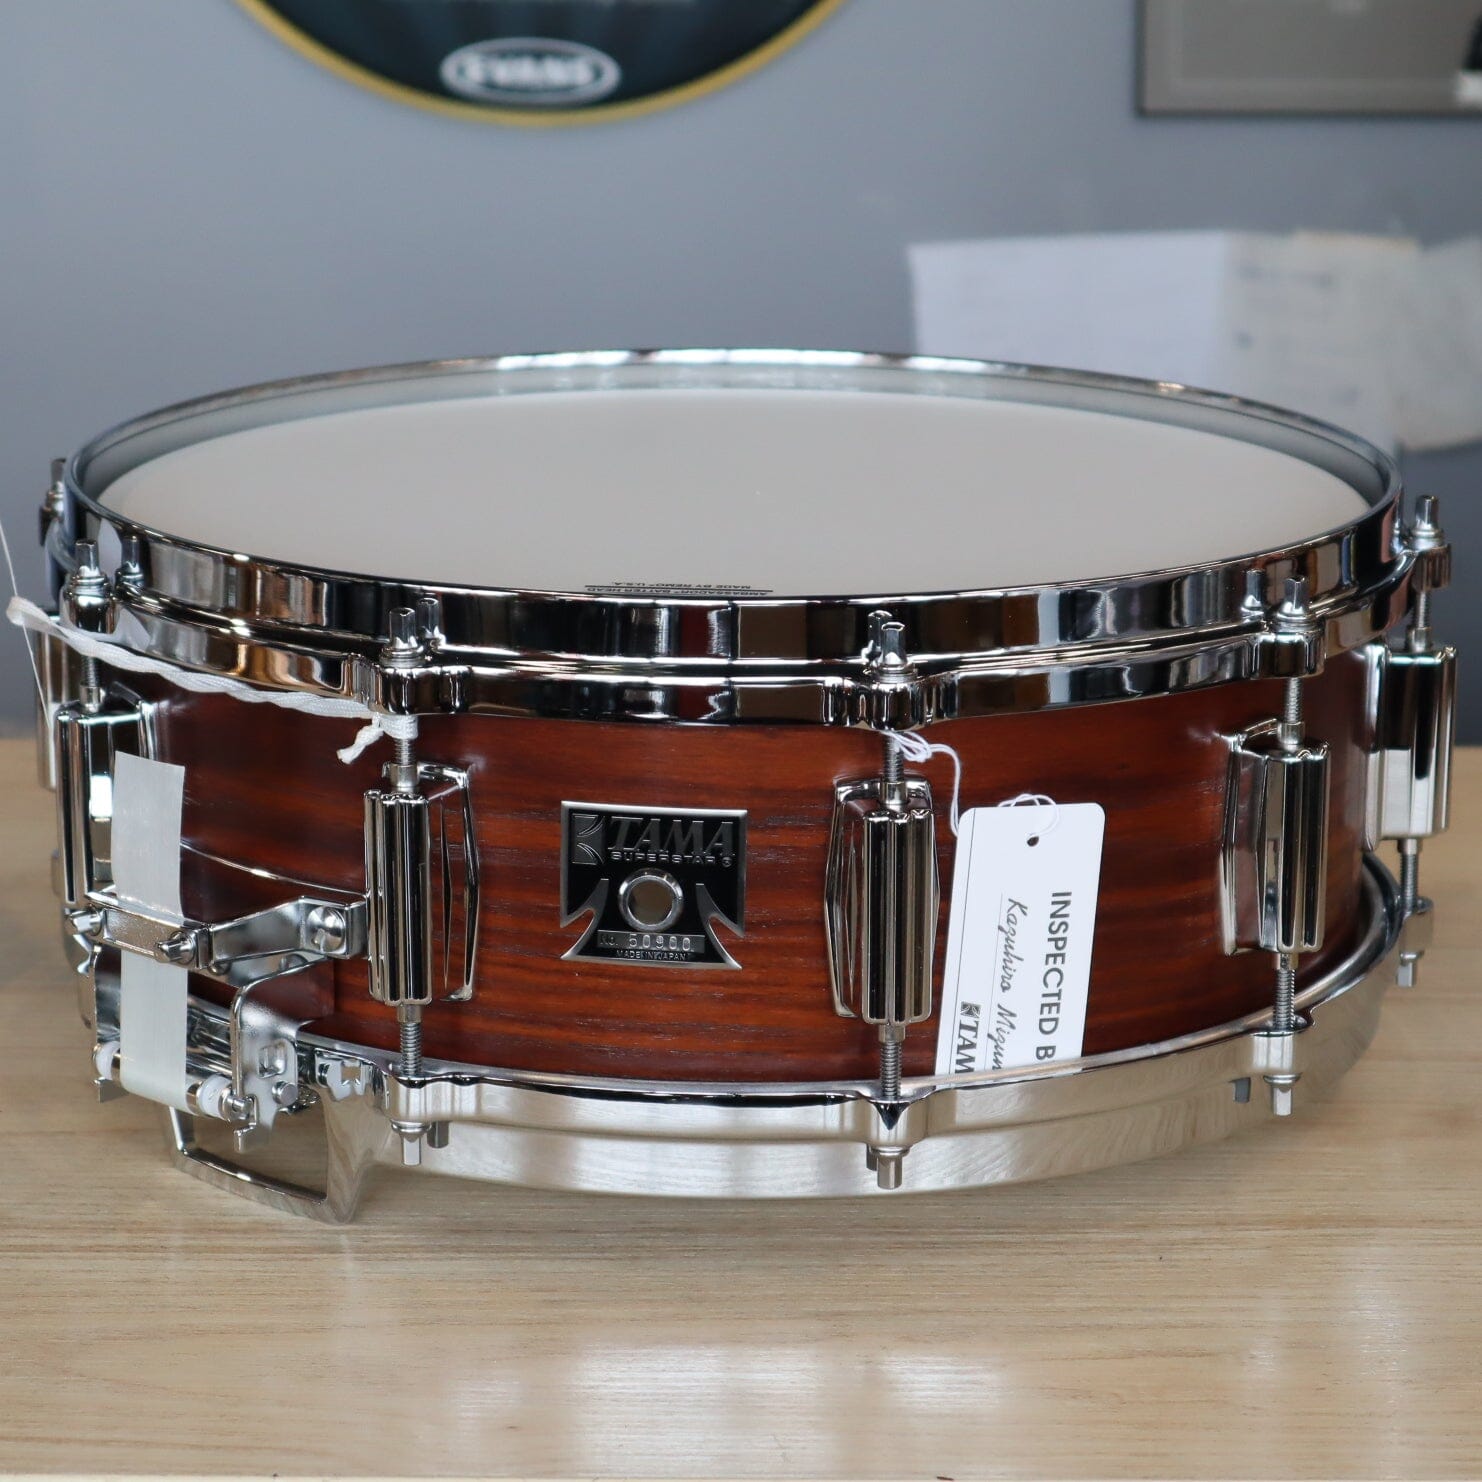 Tama 14x5" 50th Limited Edition Mastercraft Rosewood Reissue Snare Drum (RW255) NEW SNARE DRUMS Tama 